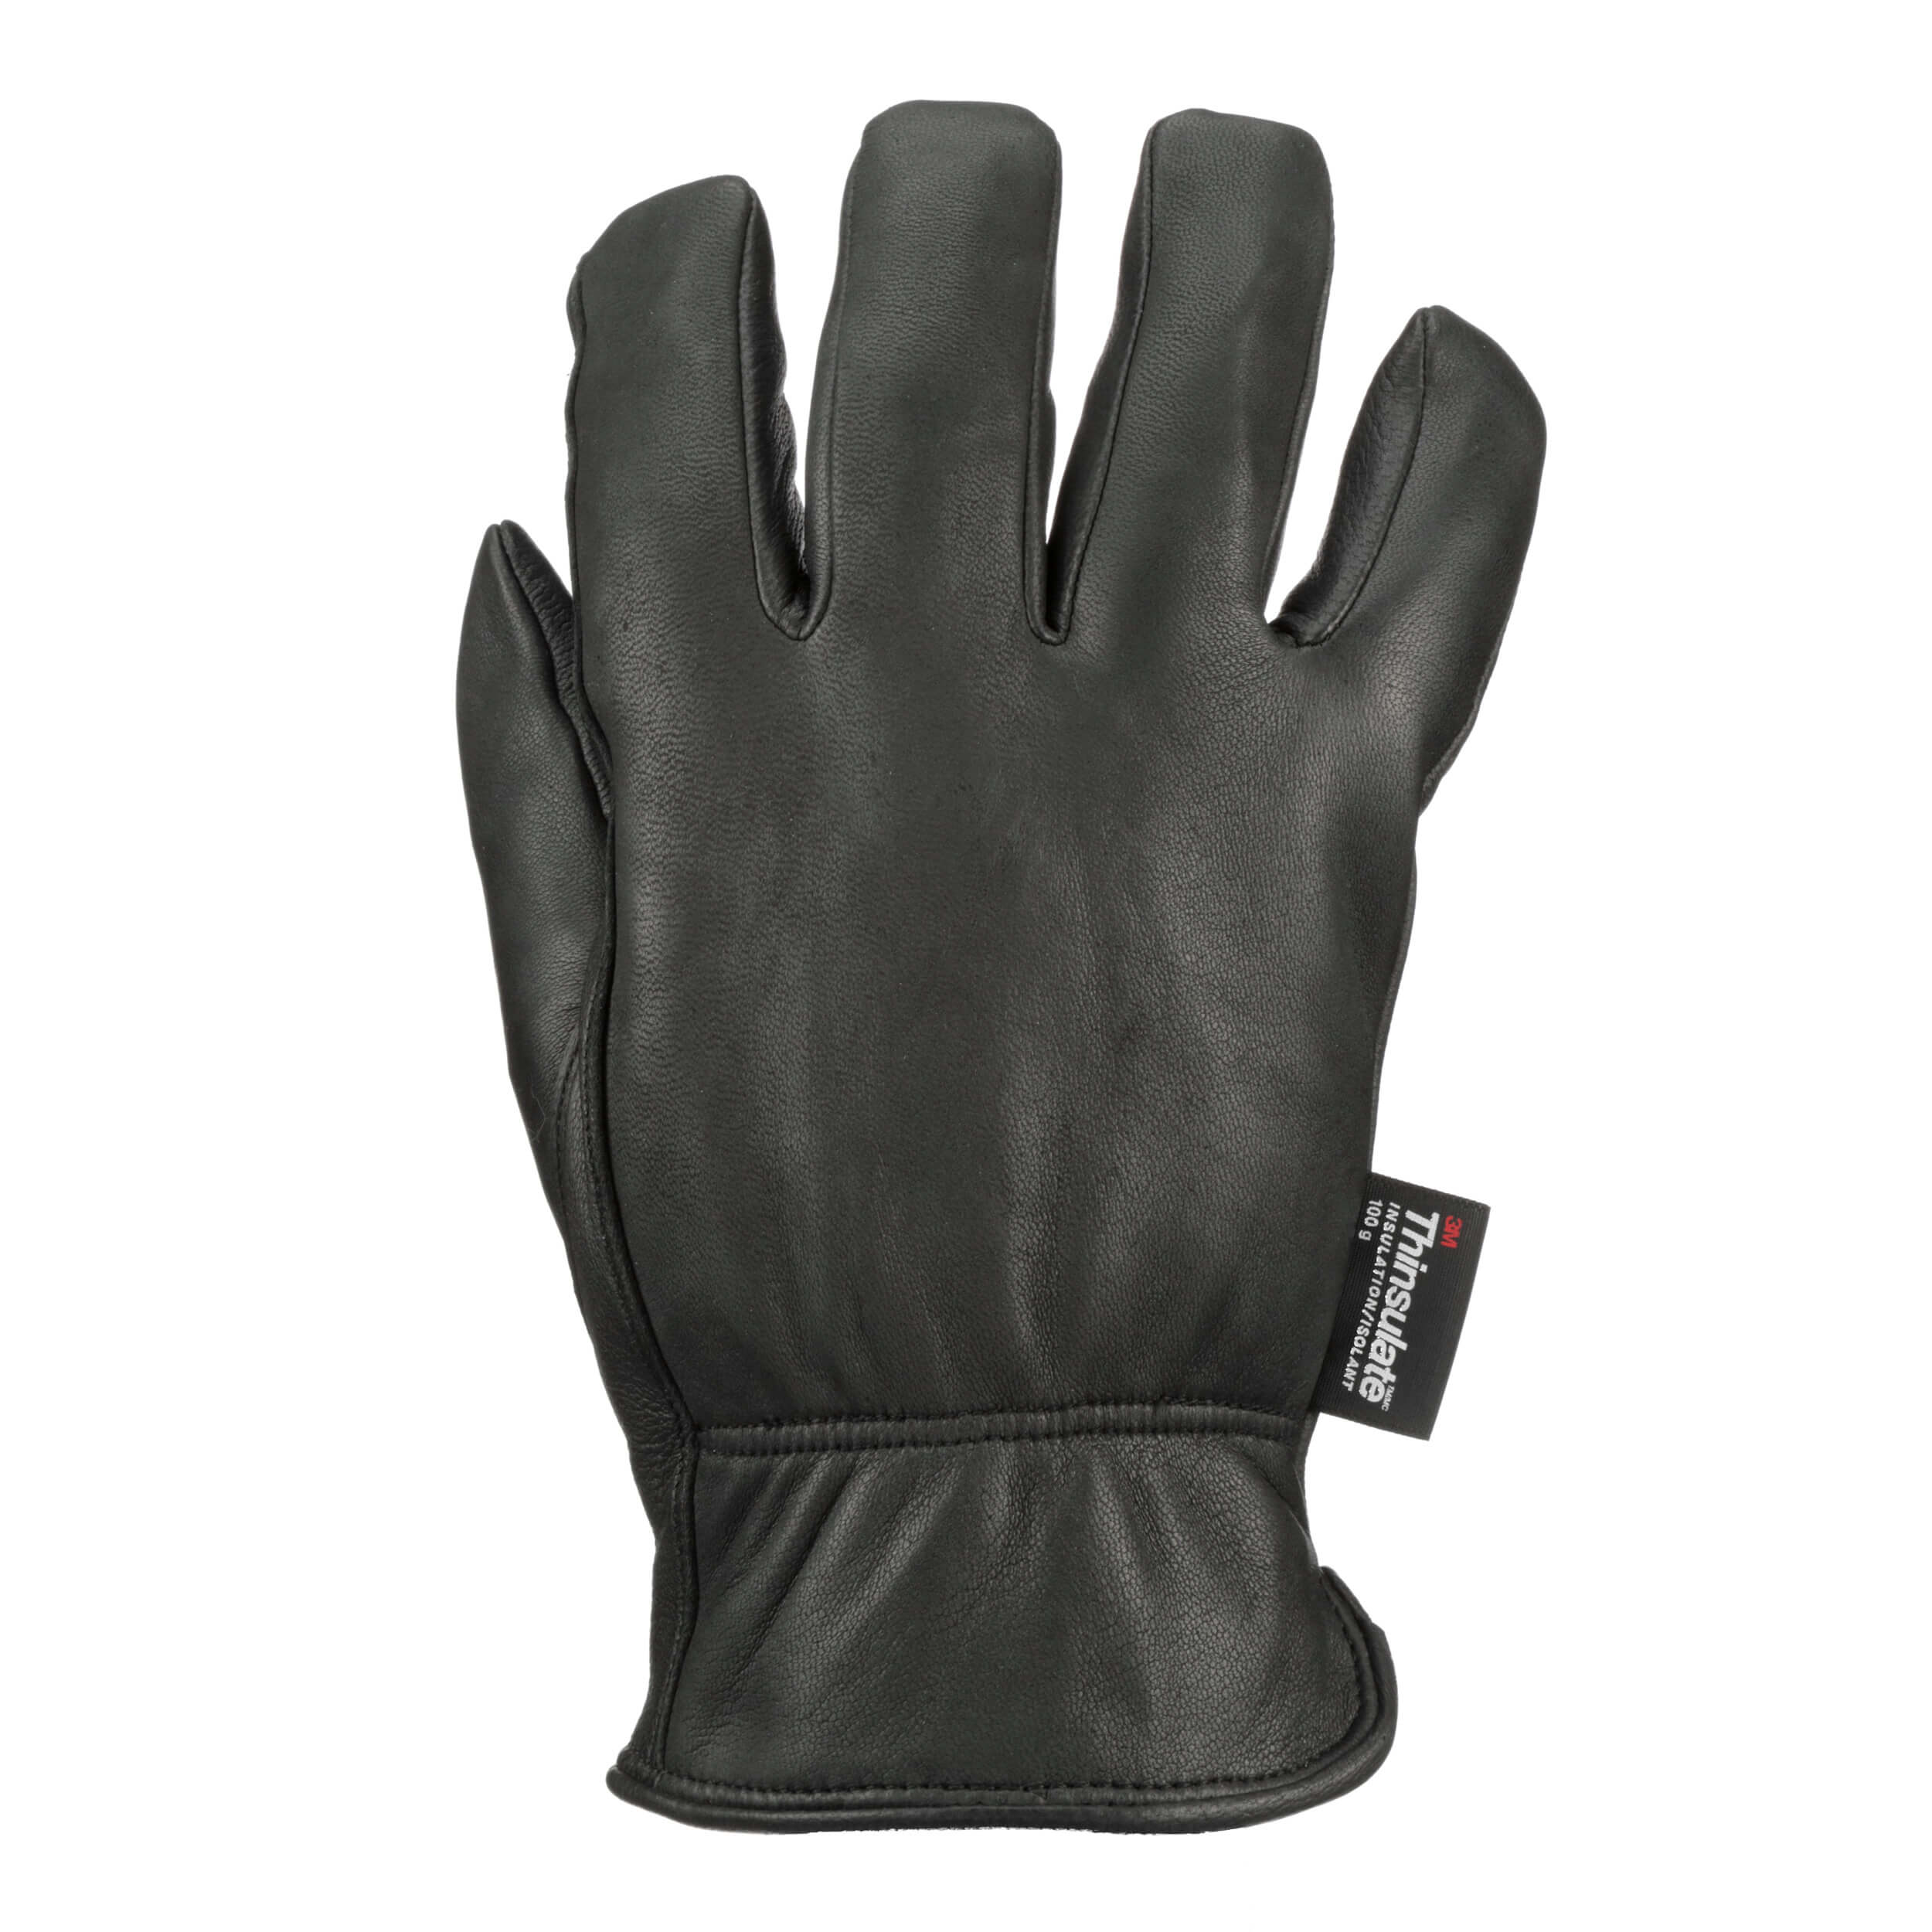 Carhartt Men's Insulated Leather Driver Gloves, Black, M